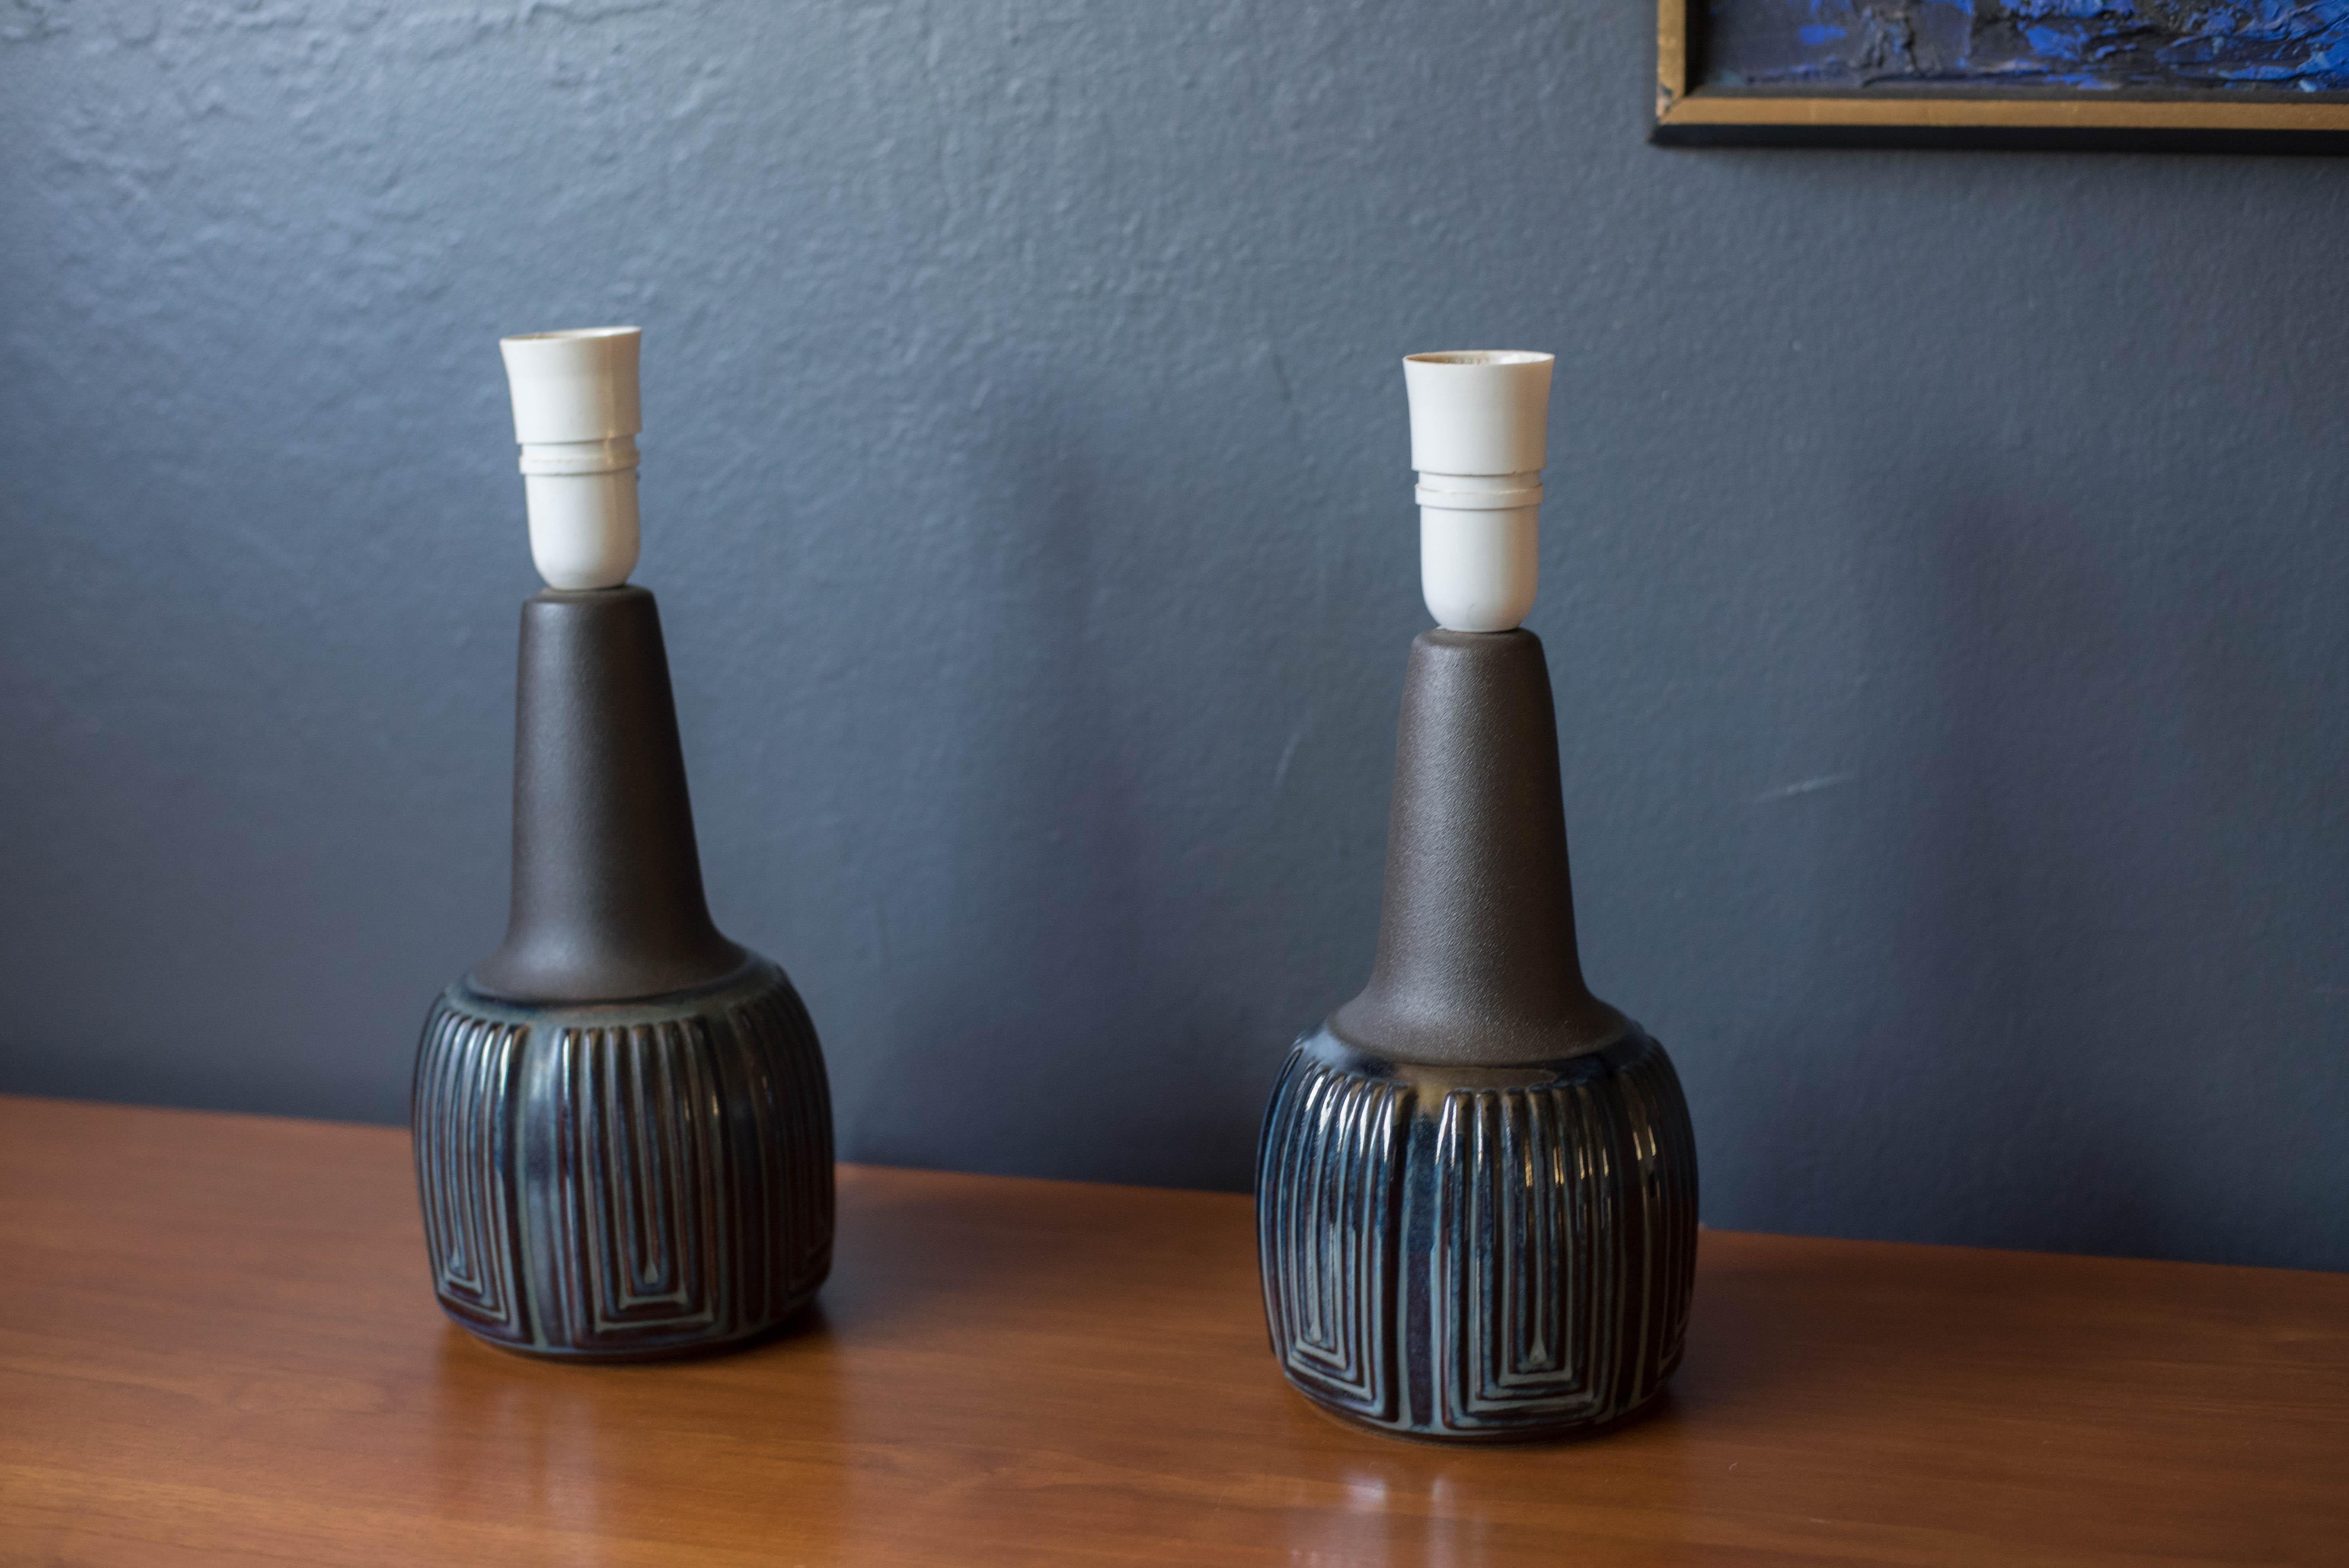 Mid-Century Modern pair of stoneware pottery lamps designed by Einar Johansen for Soholm Stentoj. This two-toned set has an engraved deep blue glaze finish and a textural matte black stem. Marked 1039 on the bottom and rewired for the US.



Offered